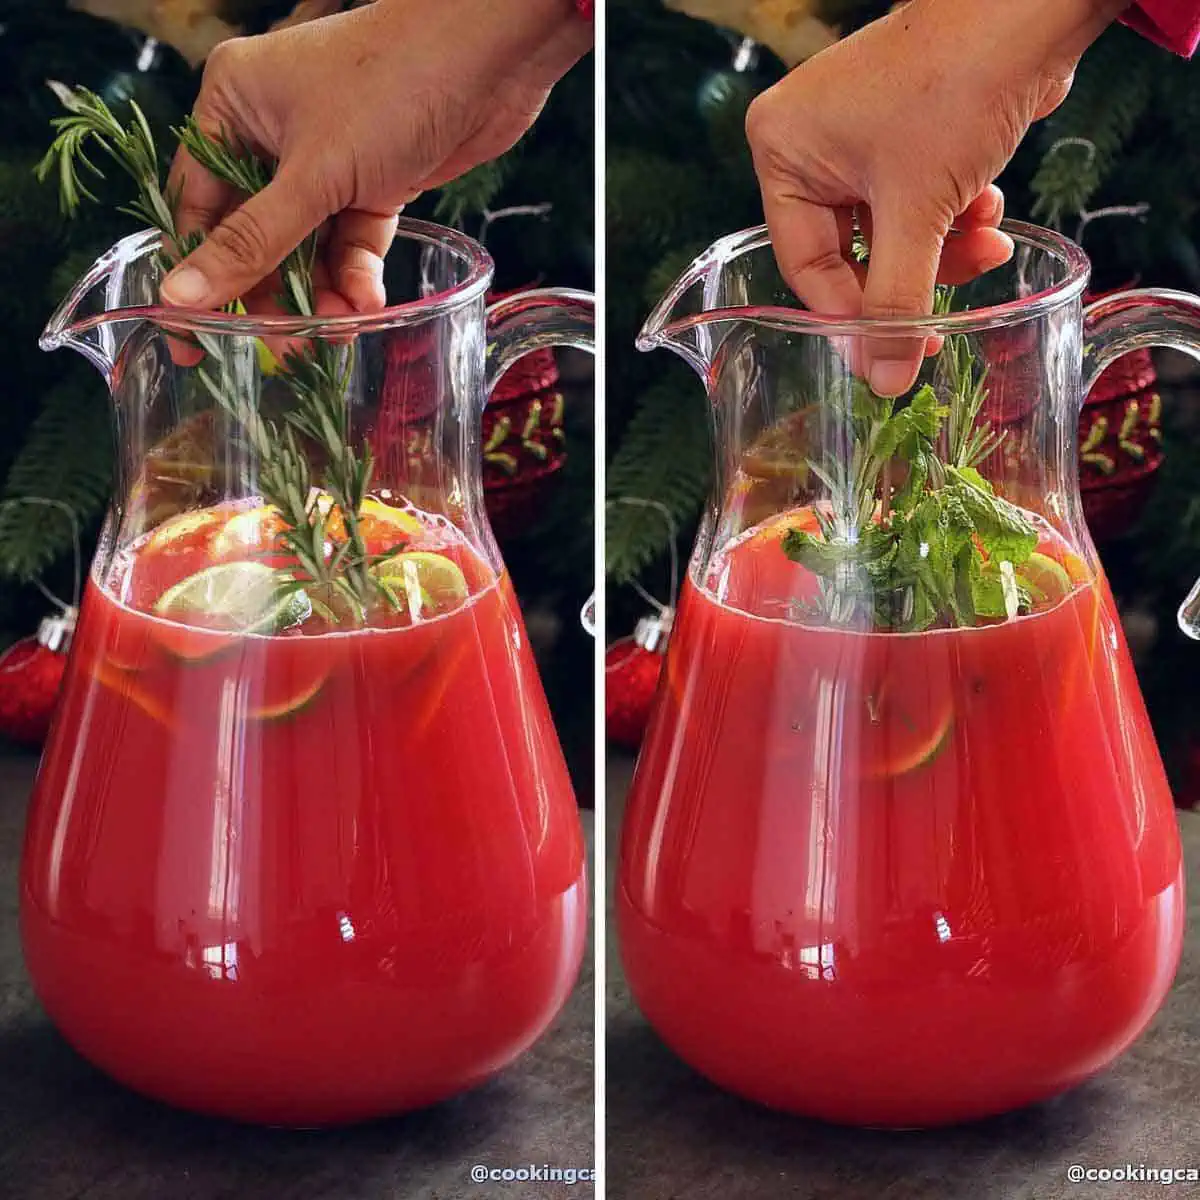 adding rosemary and mint to Christmas punch.